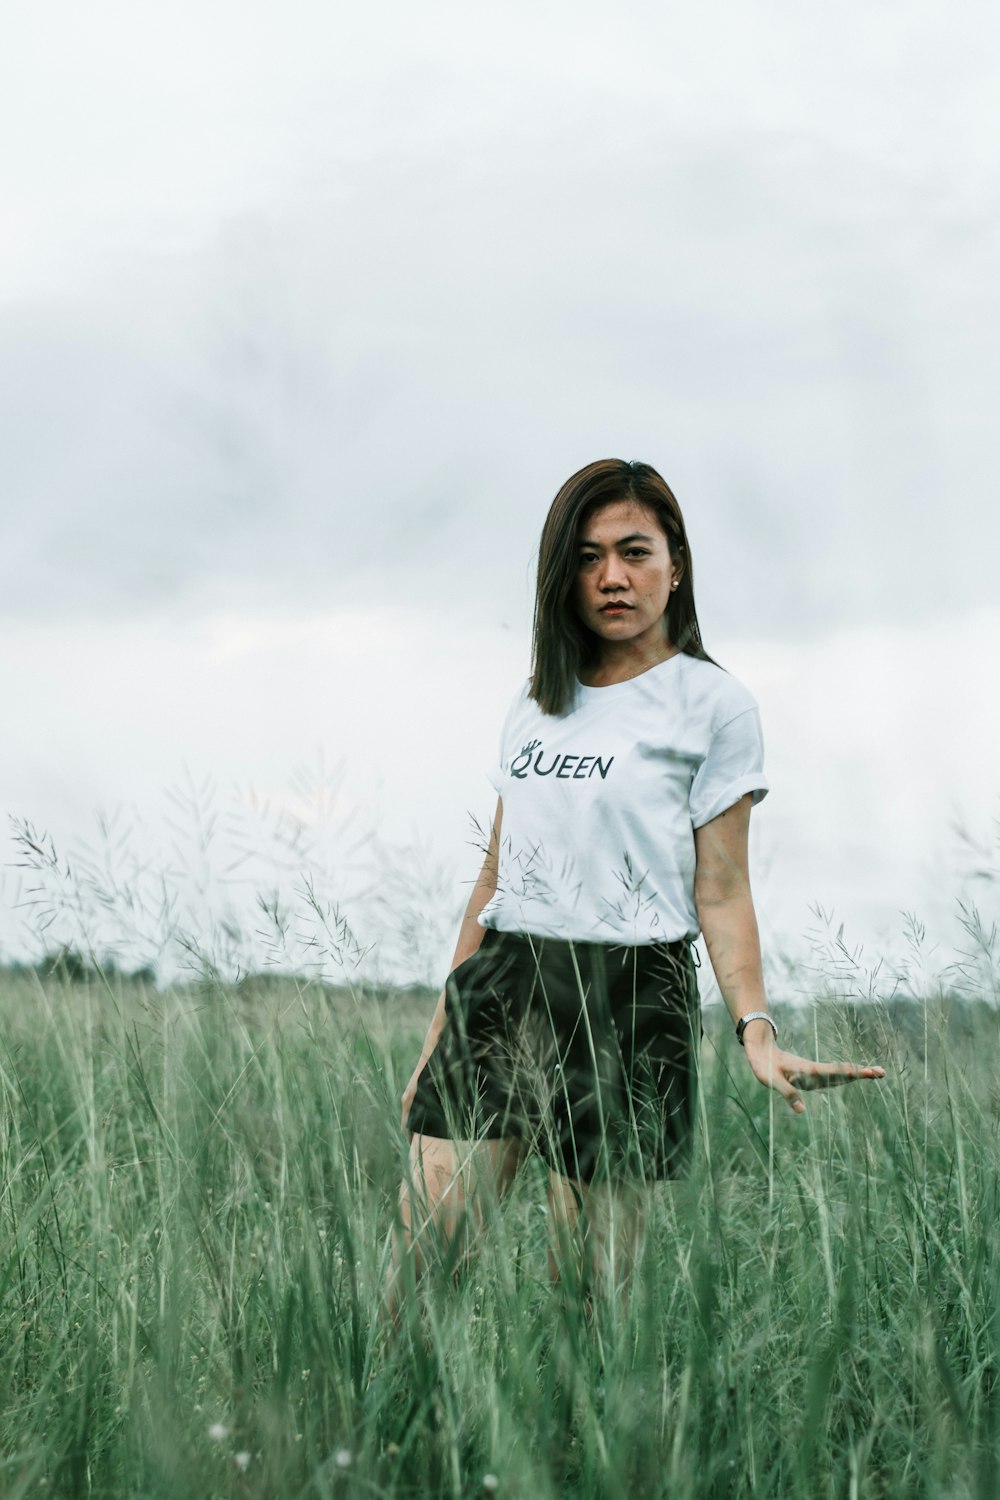 woman in white shirt standing on grass field during daytime